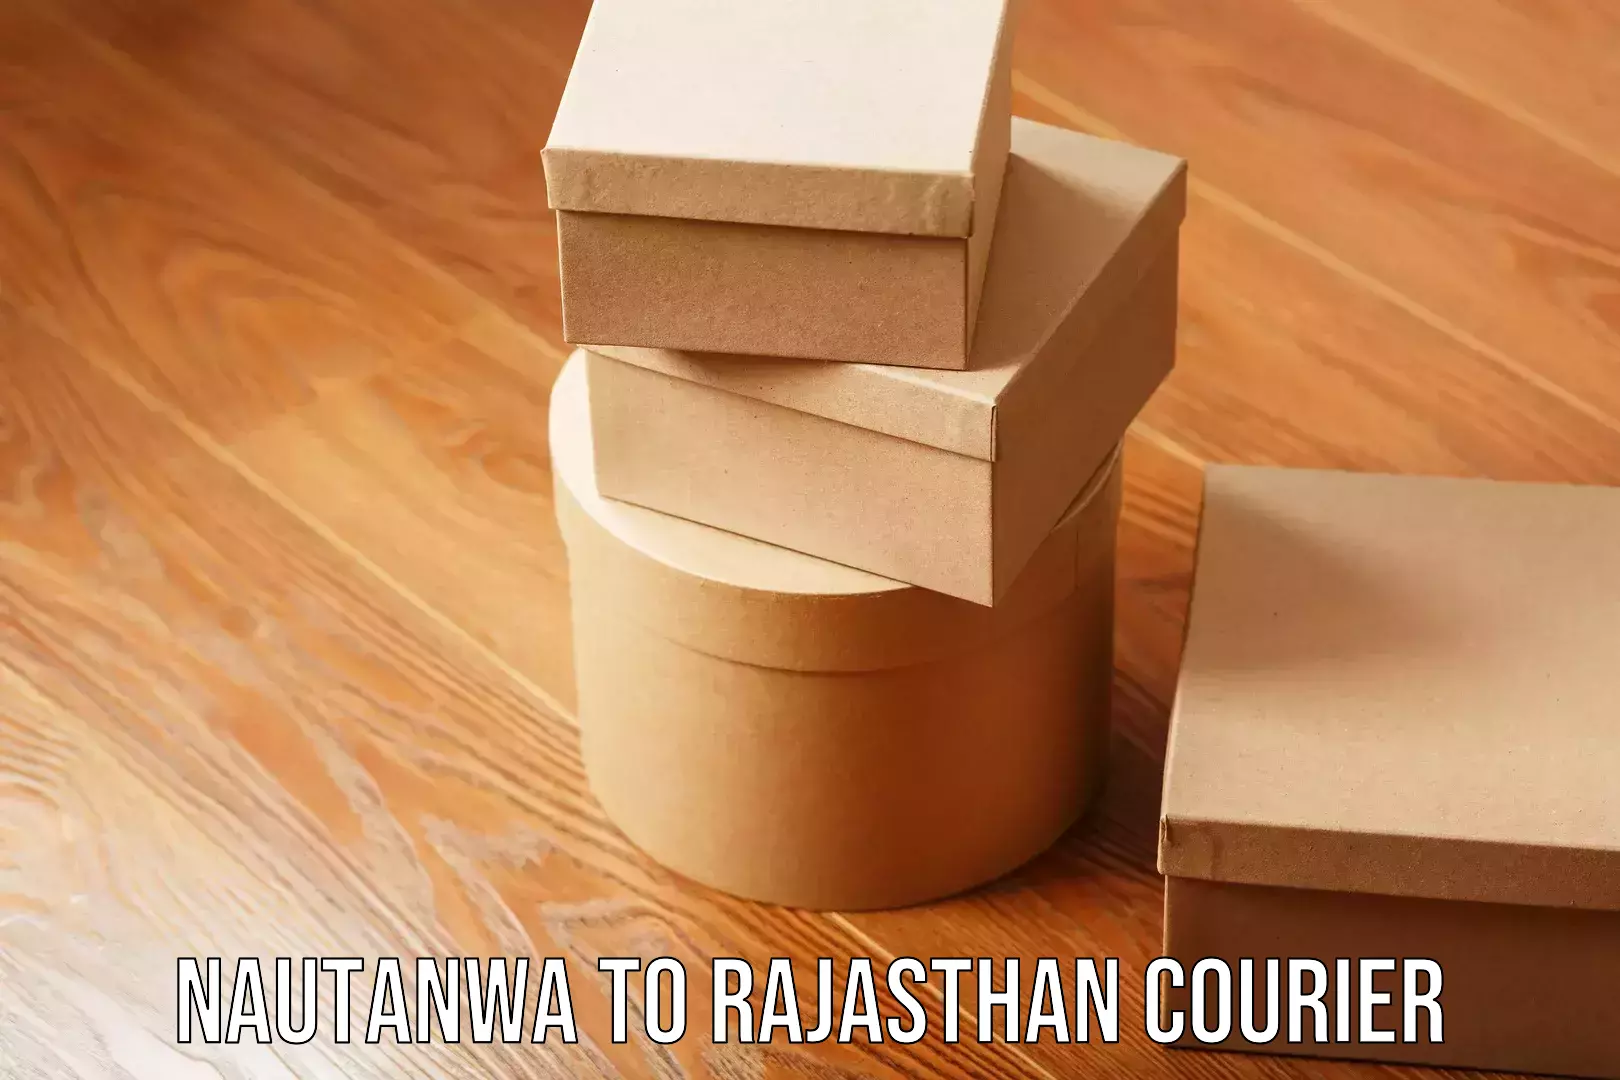 Hassle-free relocation in Nautanwa to Rajasthan